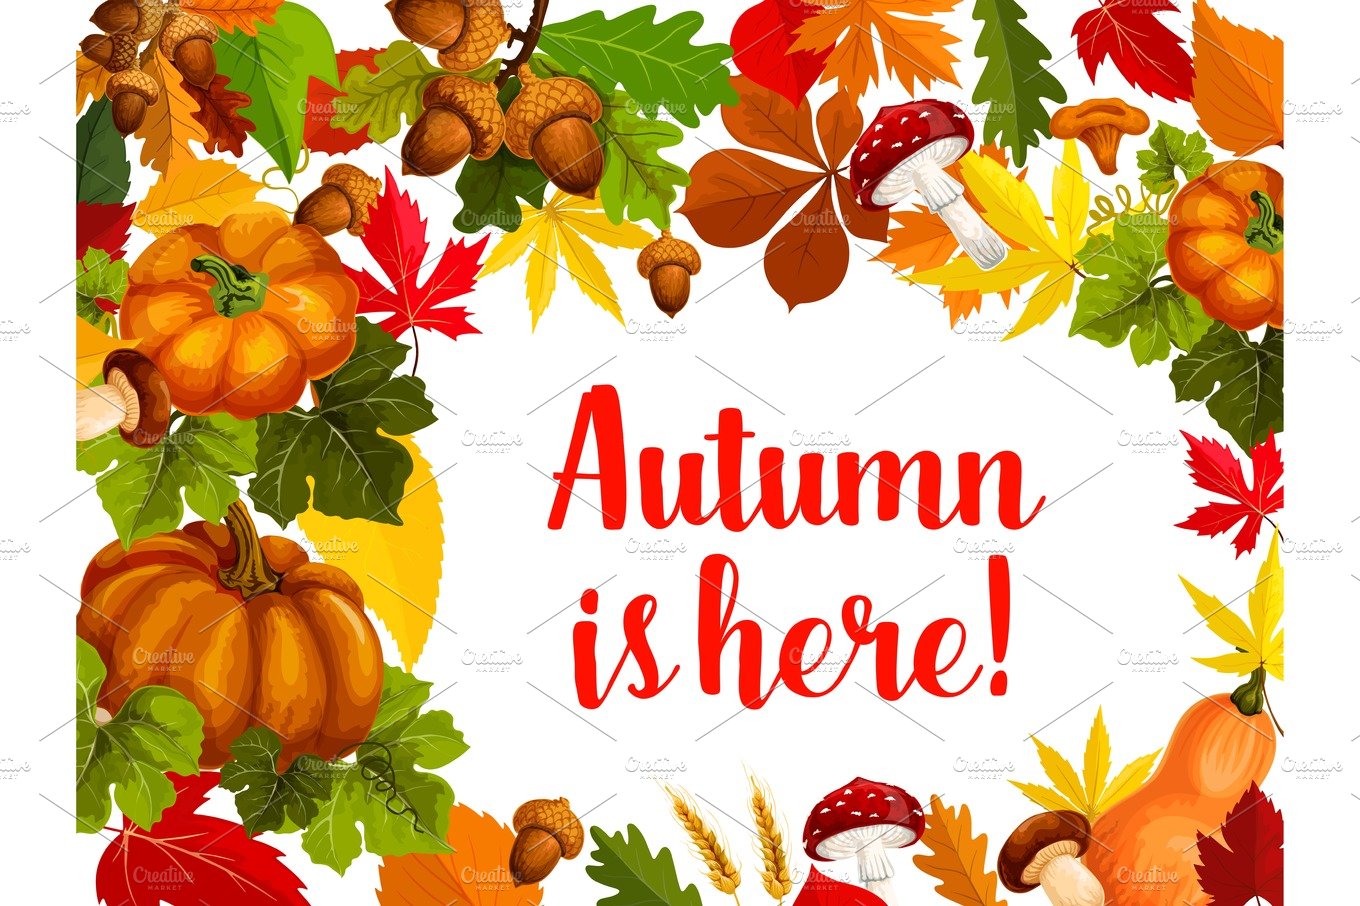 Autumn season poster with fall leaf and pumpkin cover image.